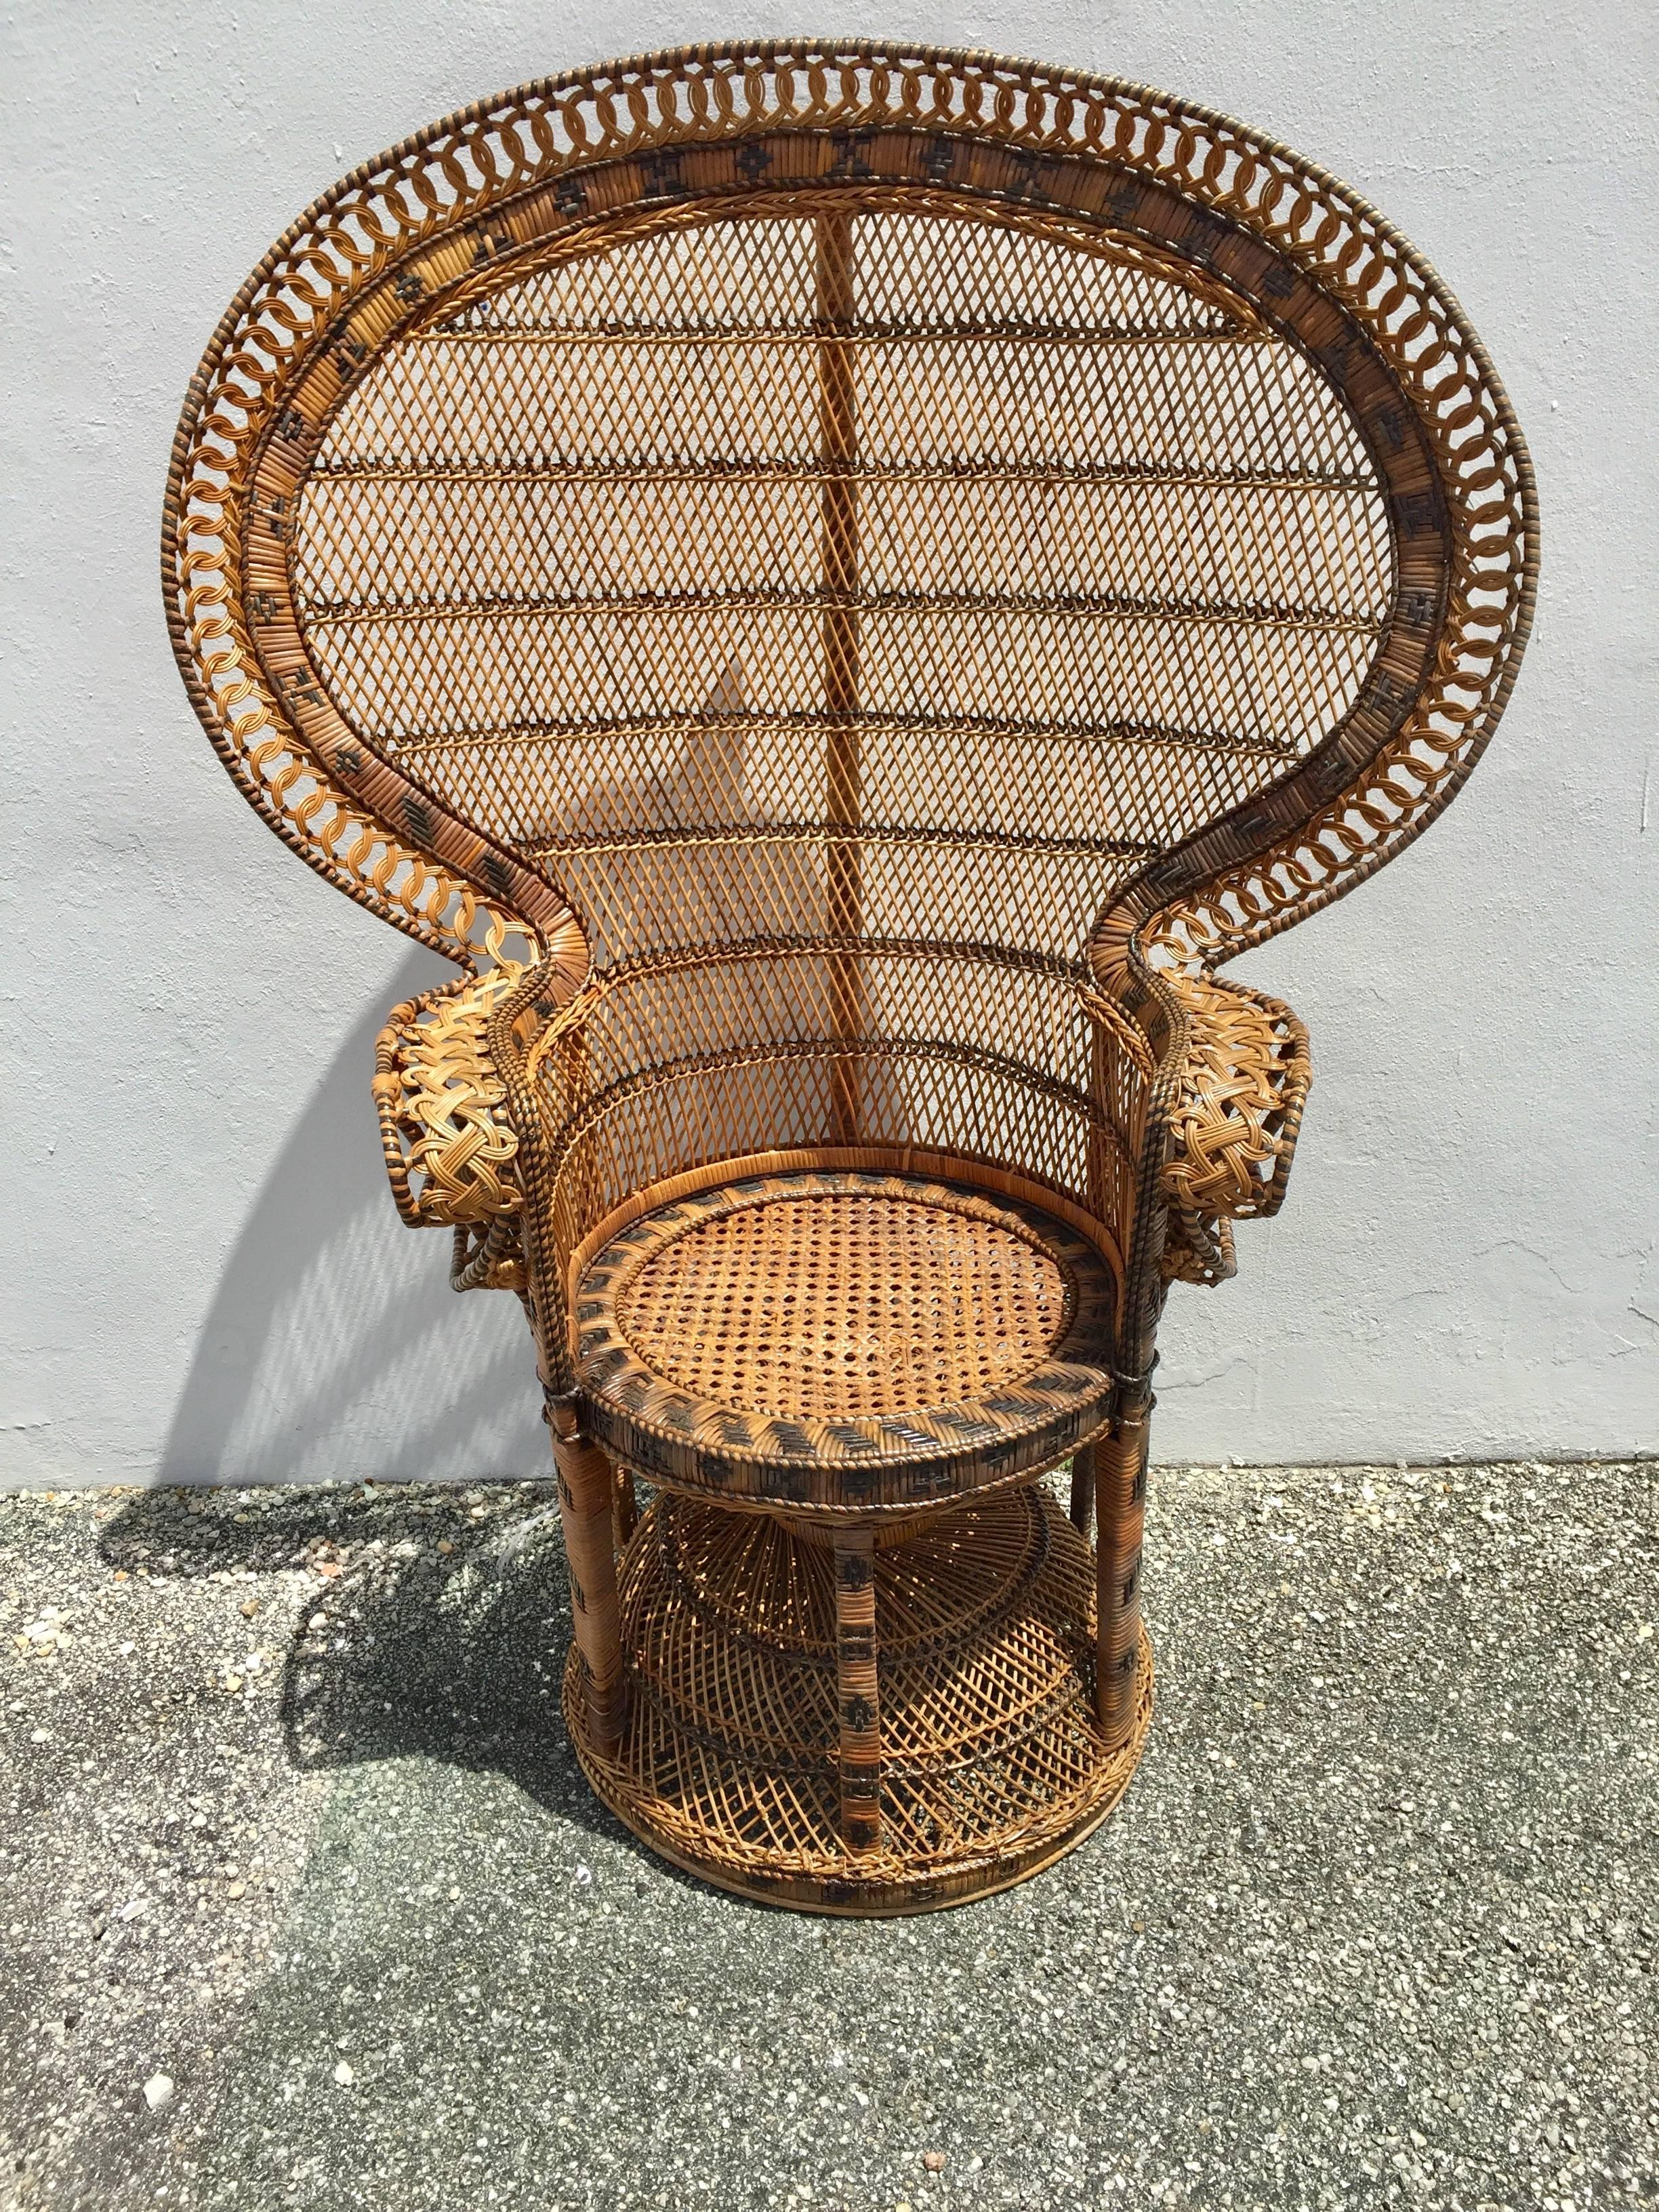  Iconic rattan two-color peacock chair and garden seat, restored
the garden seat measures 15" D x 18" H.
      